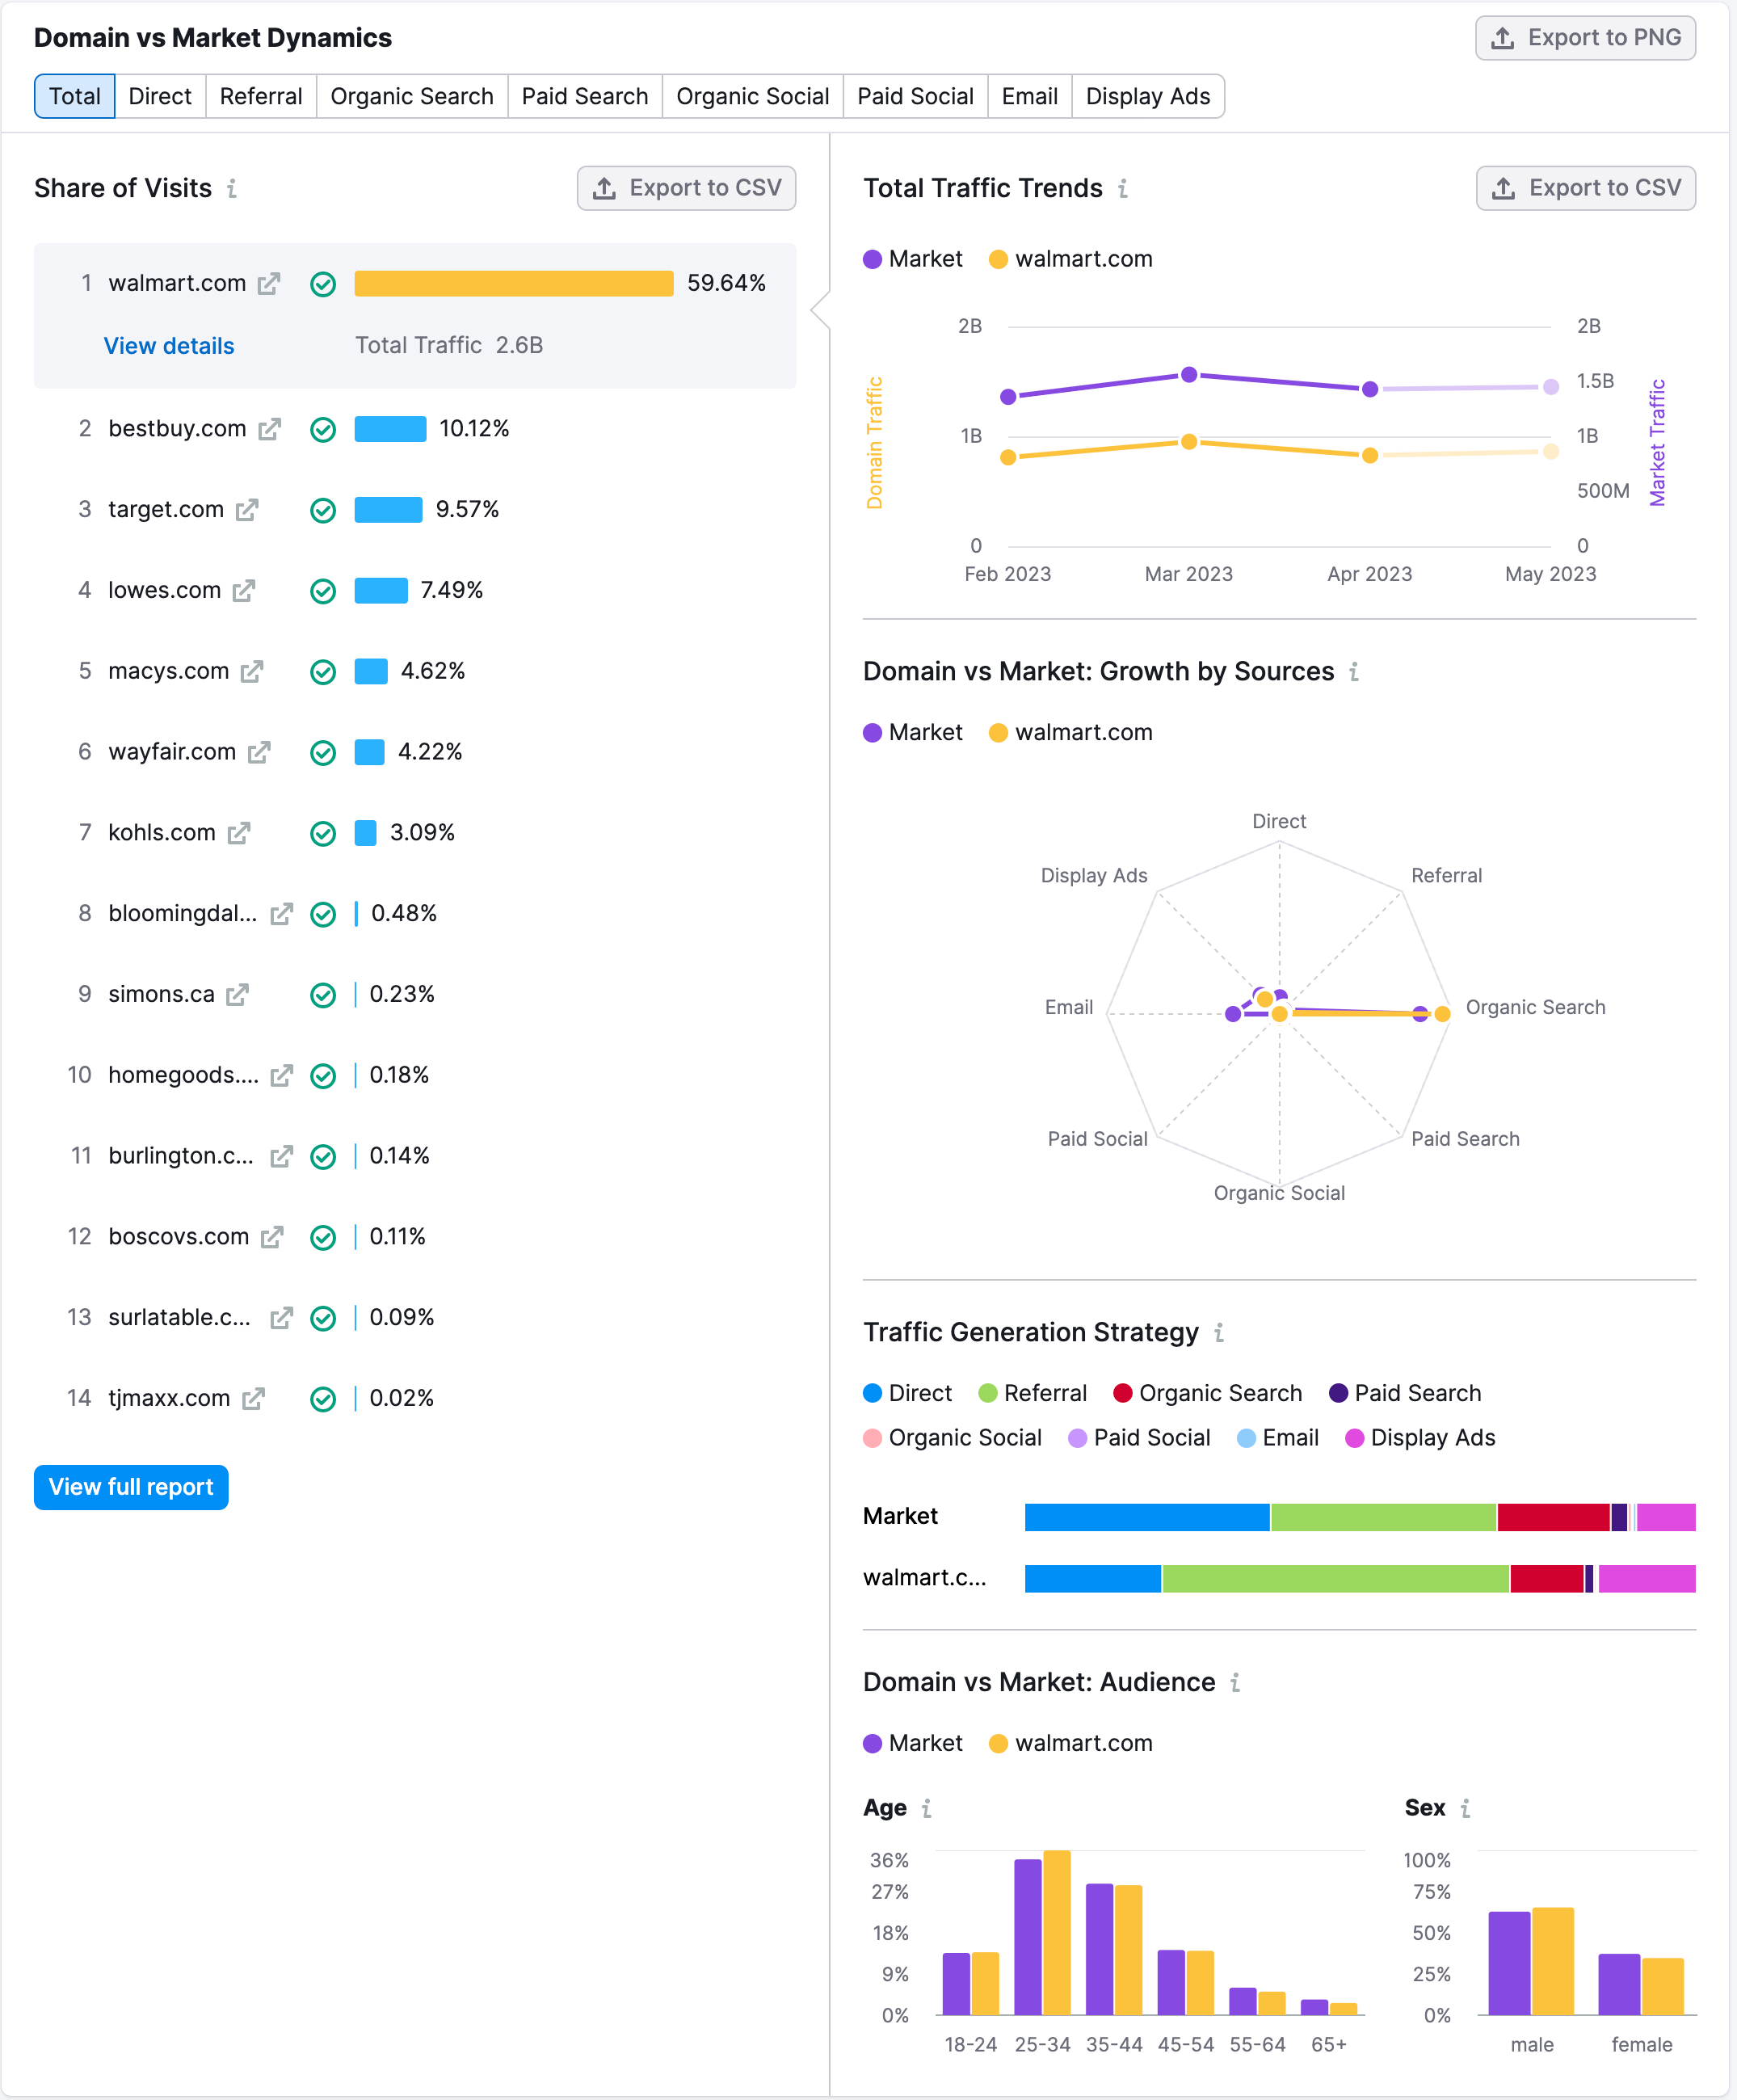 An example report showing all widgets from the Domain vs Market Dynamics section. The widgets displayed are the following: Share of Visits, Total Traffic Trends, Domain vs Market: Growth by Sources, Traffic Generation Strategy, and Domain vs Market: Audience.